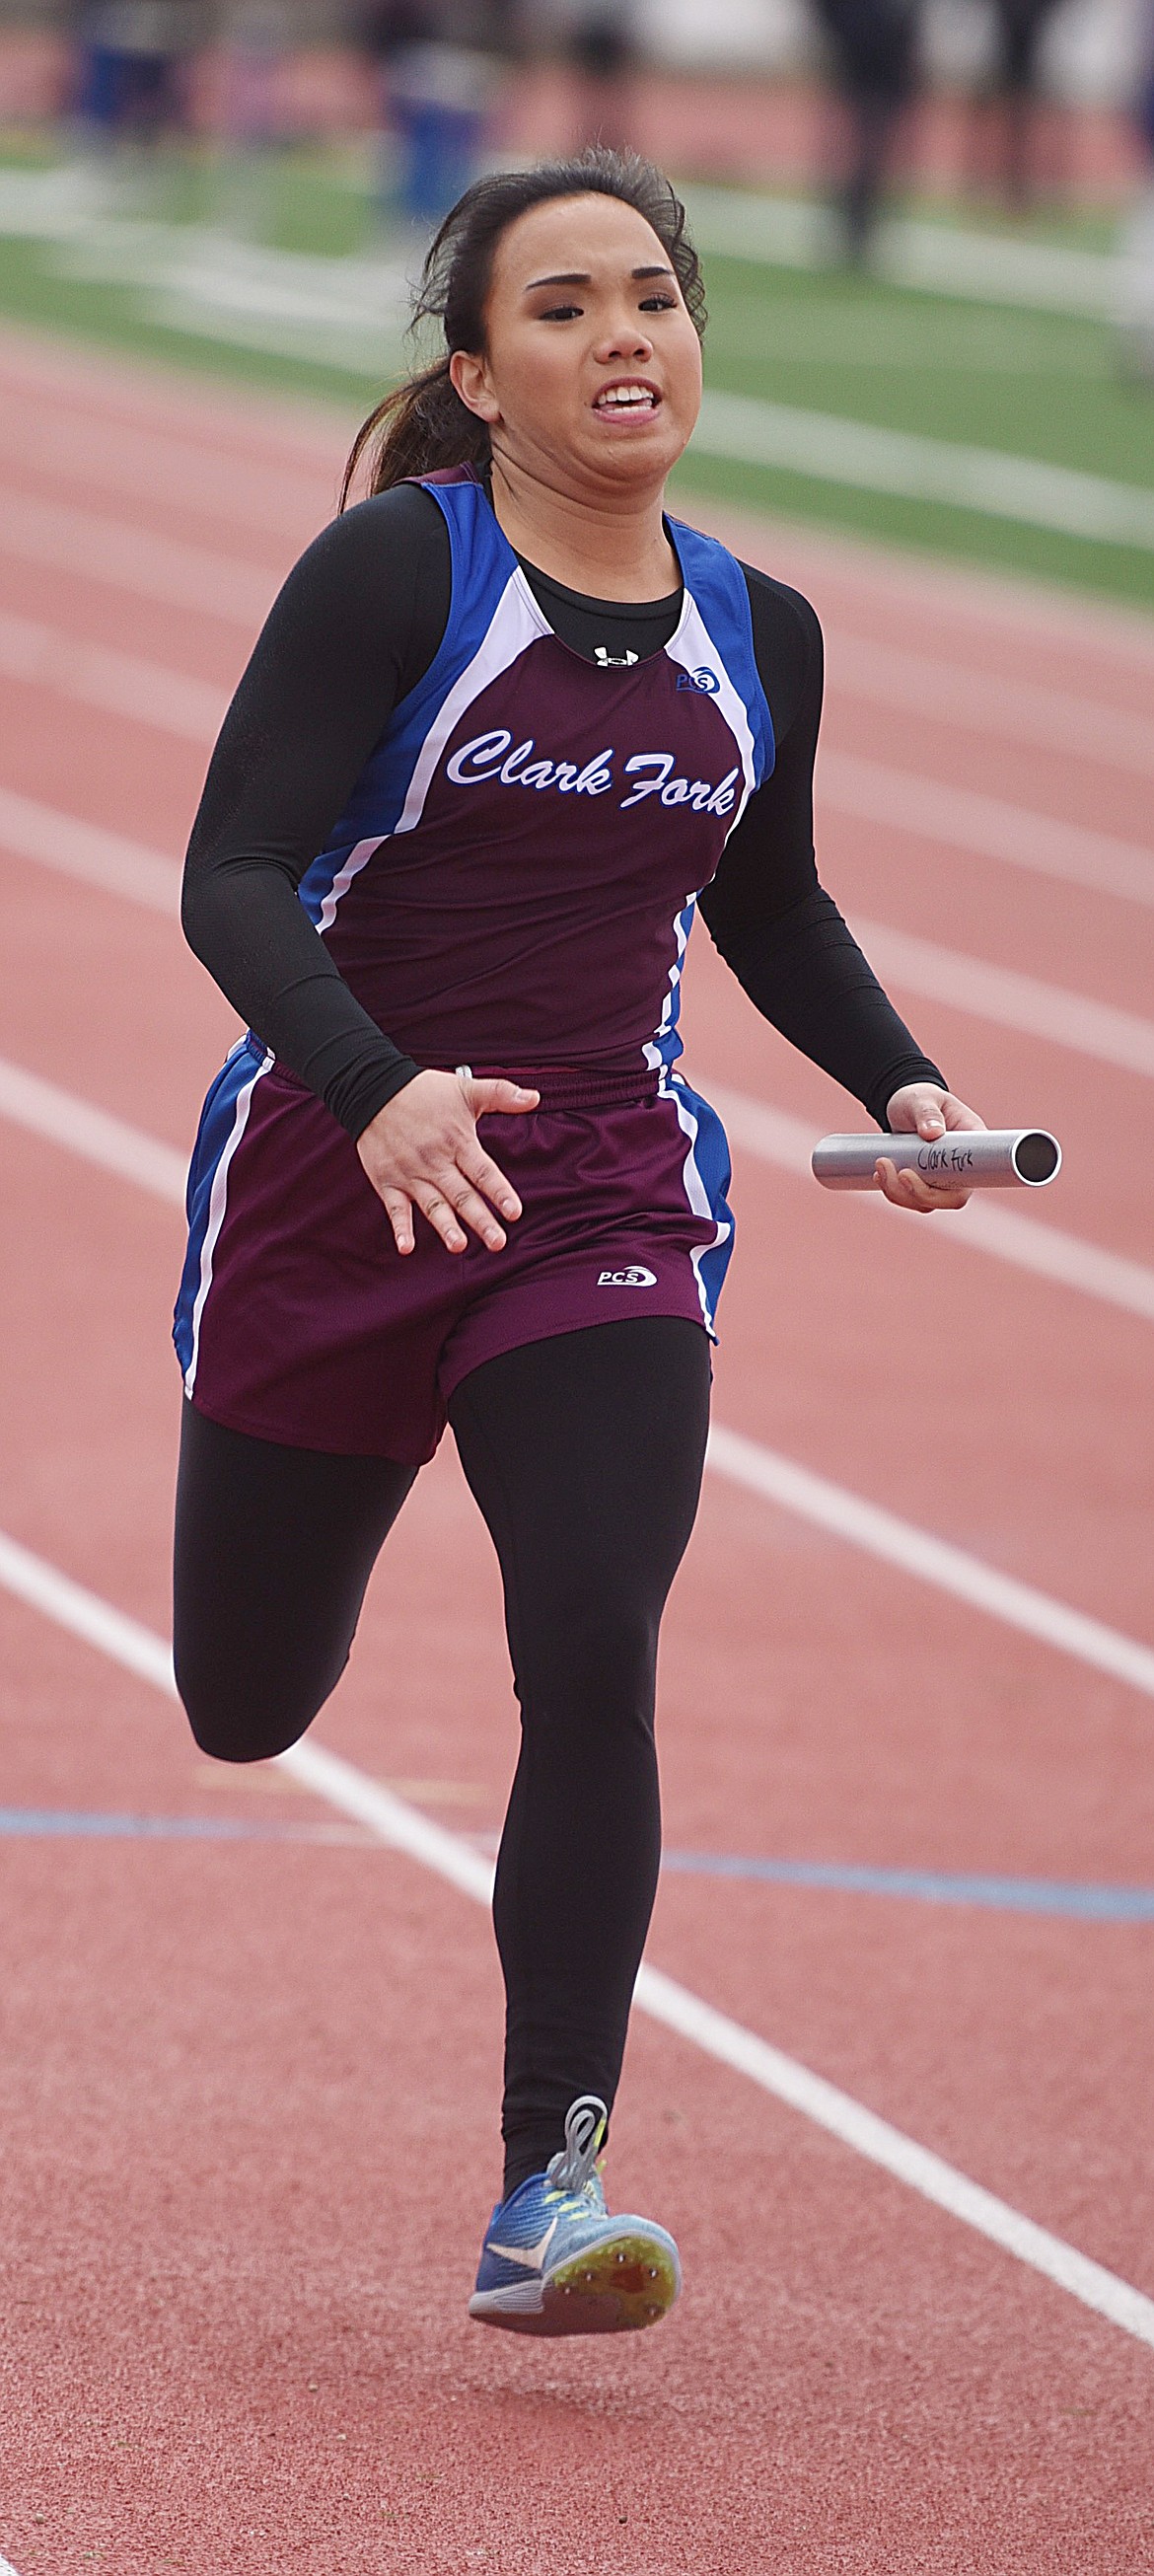 SOPHIA KRUTILLA churns down the home stretch while running the anchor leg of the 4x100 relay at the Frenchtown Invitational in Missoula. (Joe Sova/Mineral Independent)